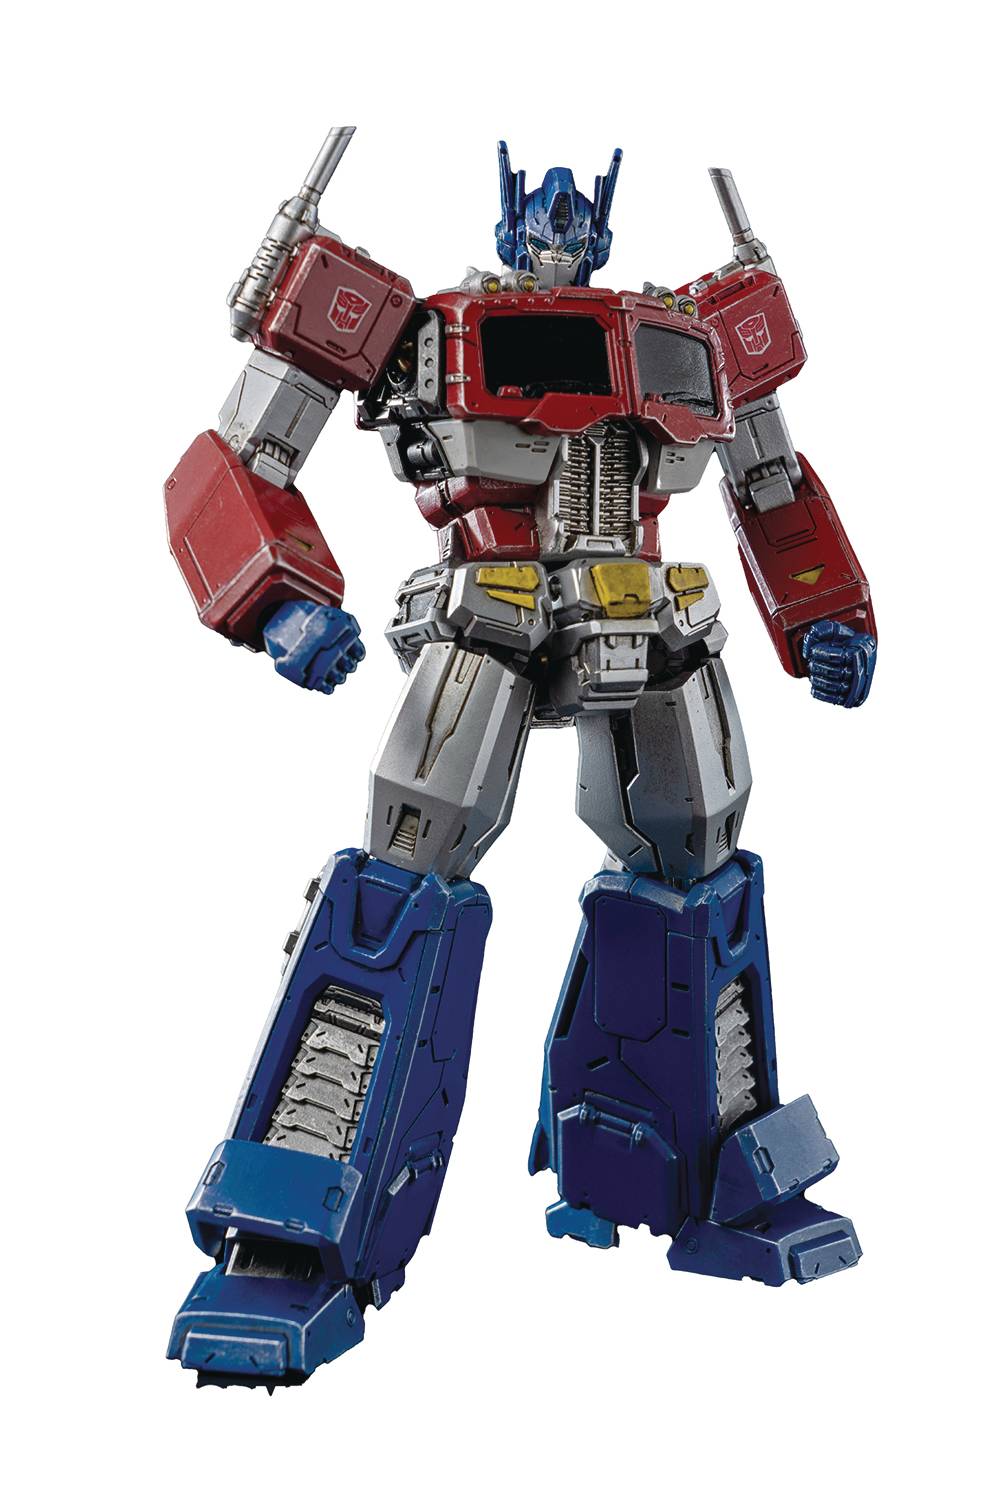 TRANSFORMERS MDLX OPTIMUS PRIME SMALL SCALE ARTICULATED FIG